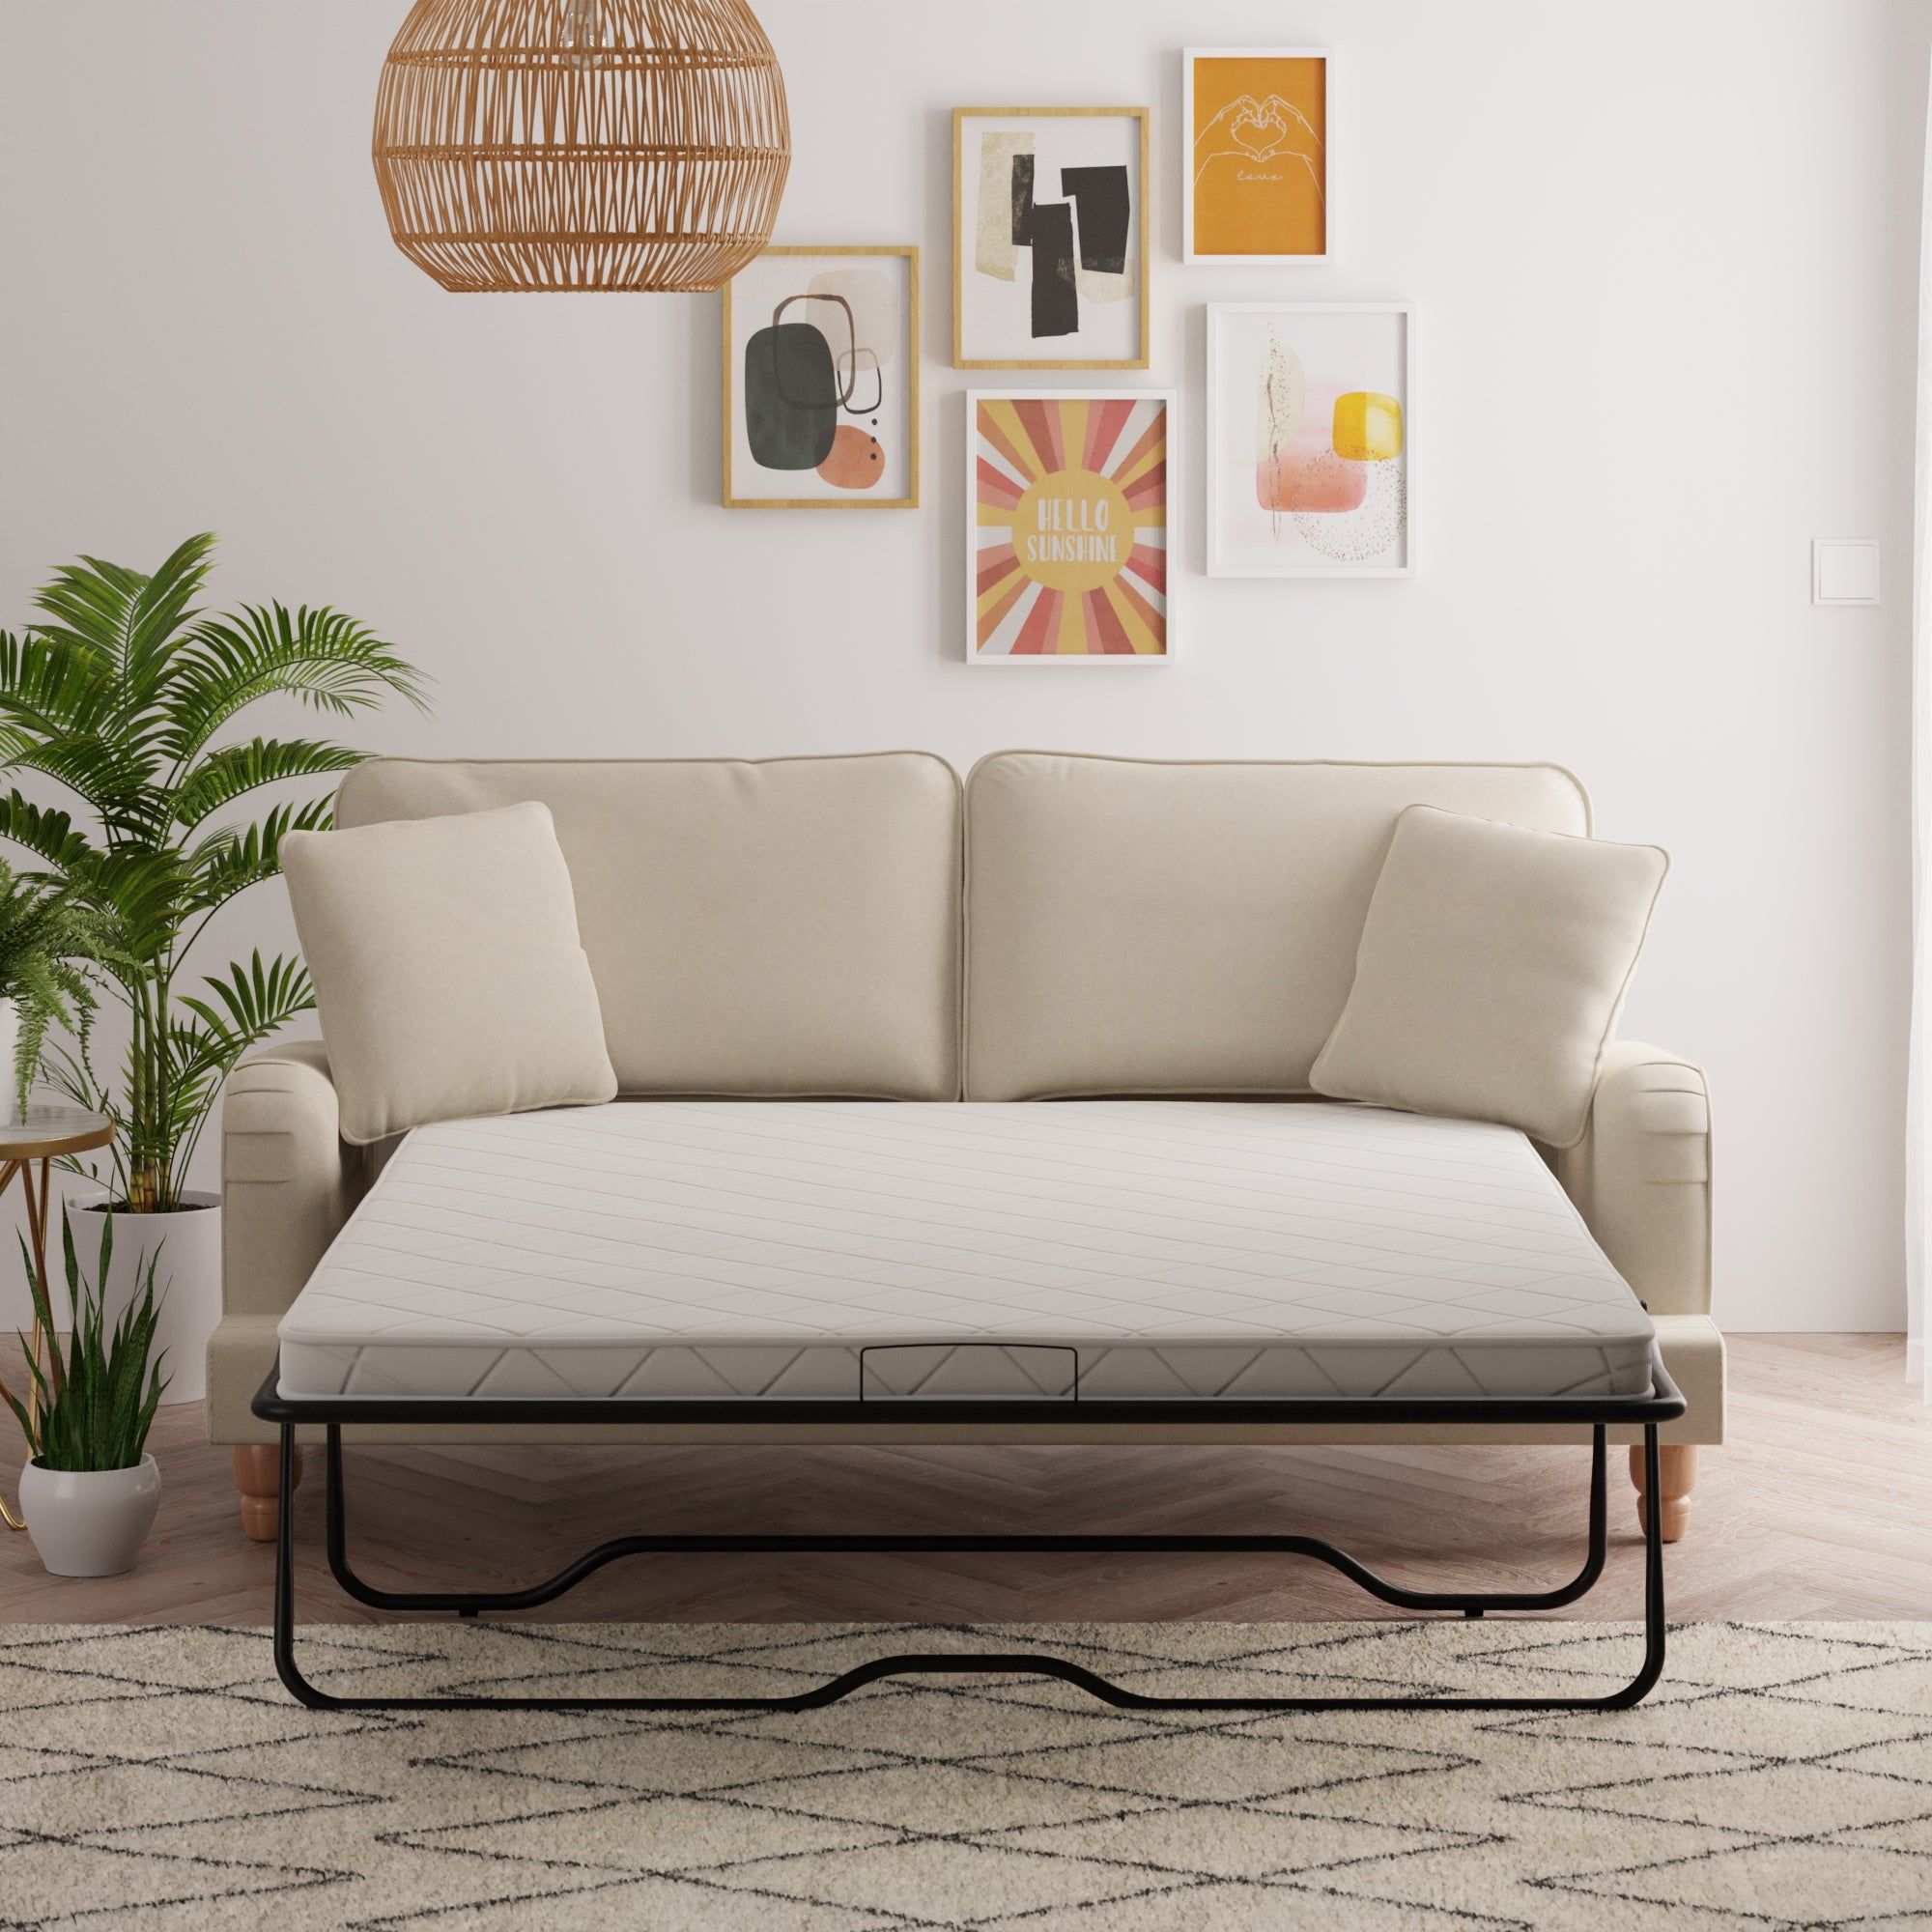 Double Sofa Beds Versatile Furniture Option for Small Spaces: The Perfect Solution for Overnight Guests